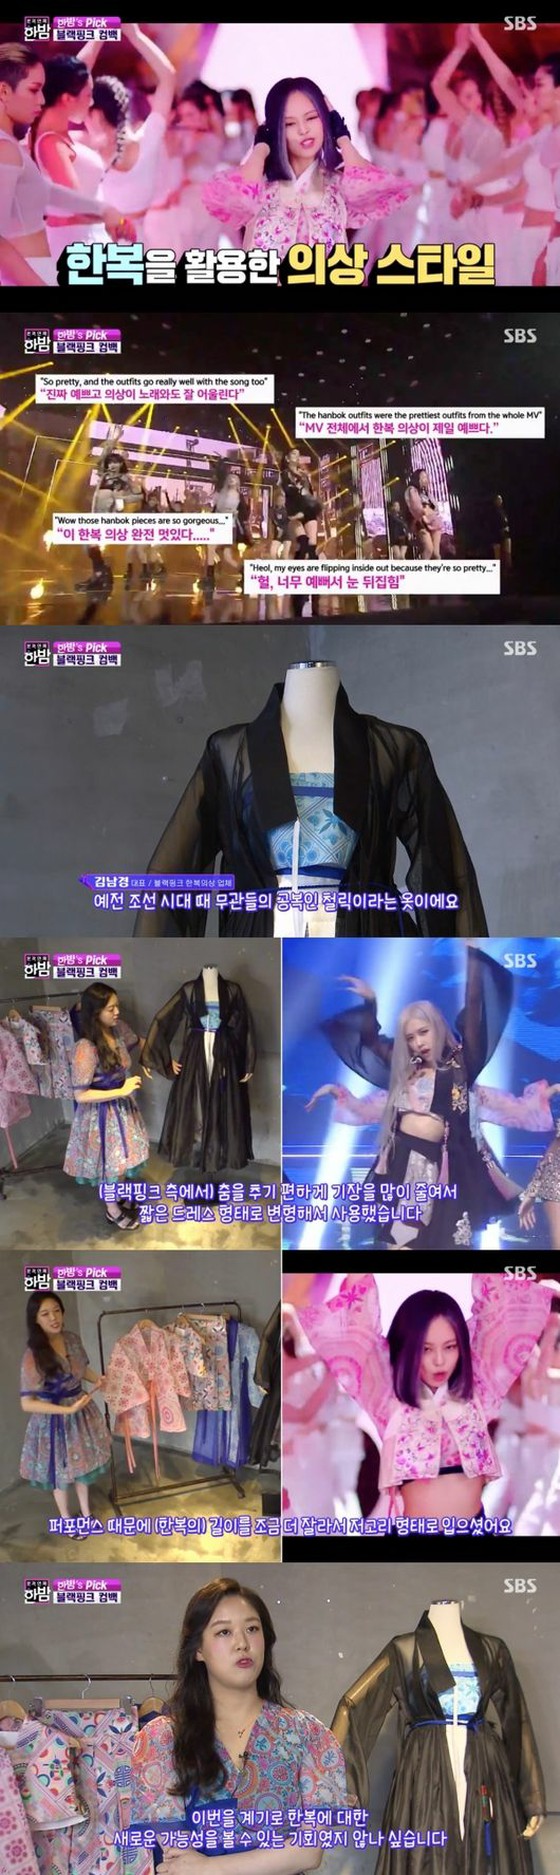 "BLACKPINK" stage Hanbok costumes gained attention all over the world